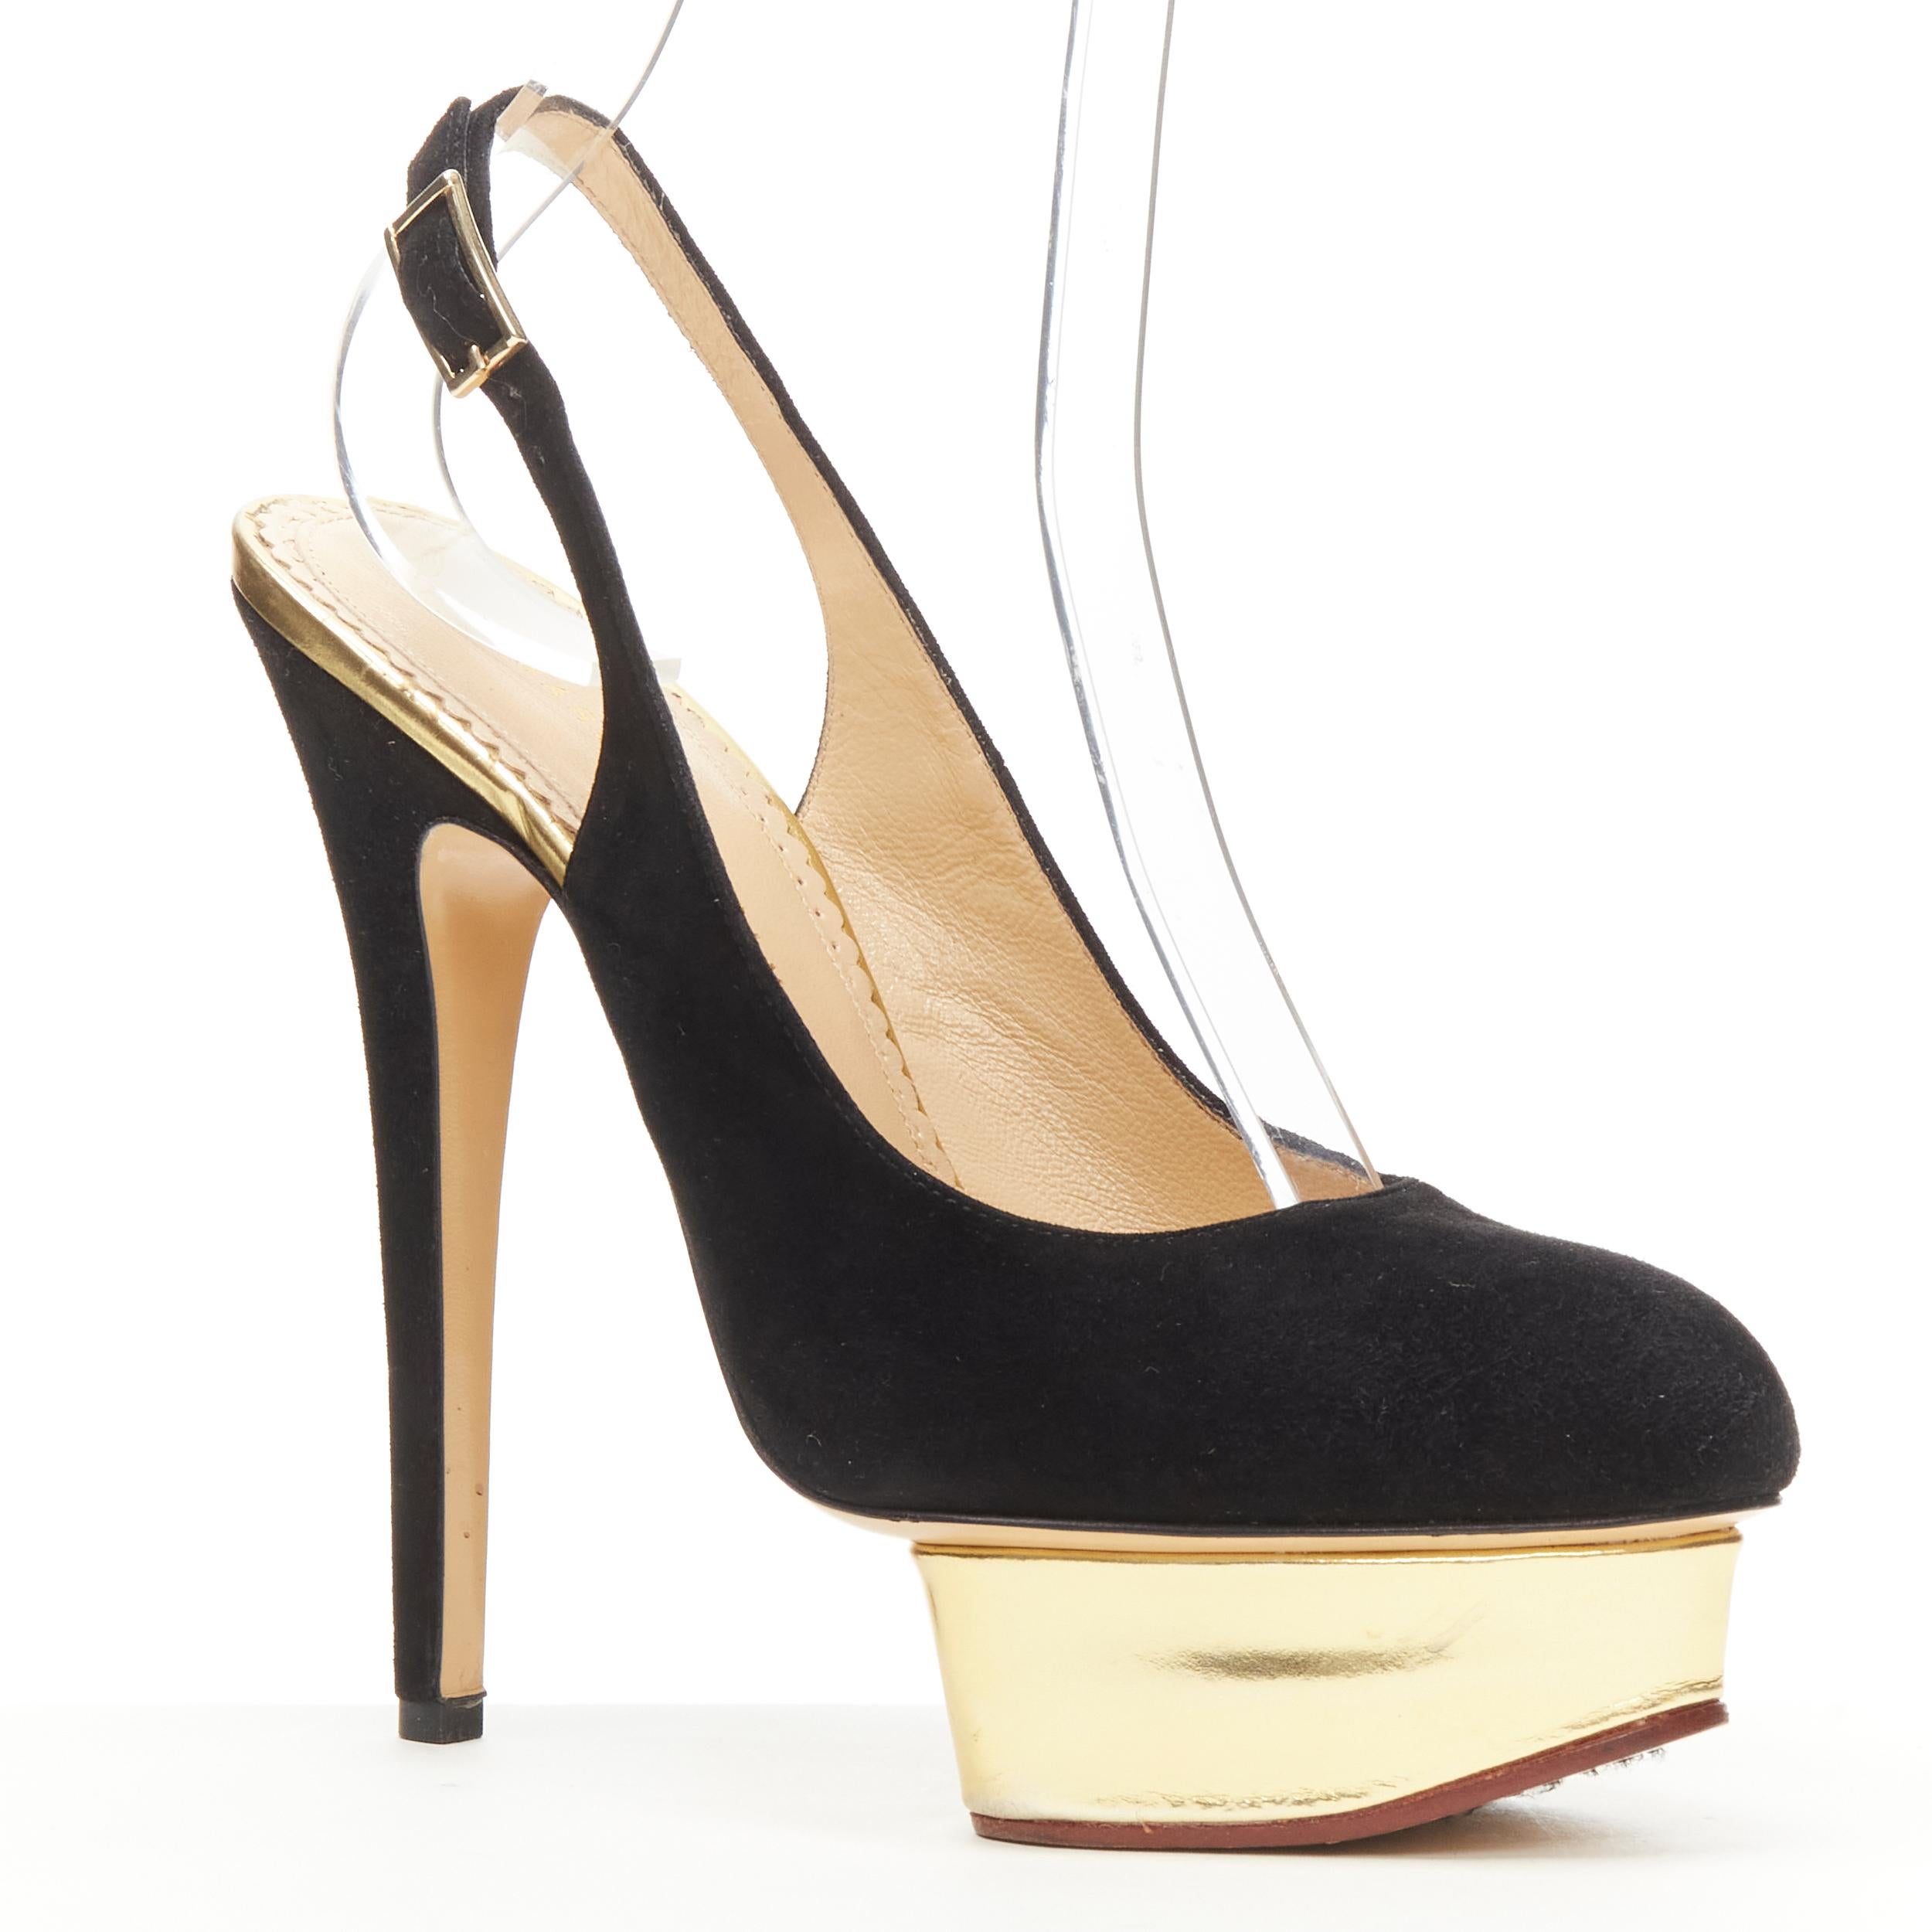 CHARLOTTE OLYMPIA Dolly black suede gold platform sling back pump EU38 
Reference: KEDG/A00125 
Brand: Charlotte Olympia 
Collection: Dolly 
Material: Suede 
Color: Black 
Pattern: Solid 
Closure: Slingback 
Made in: Italy 

CONDITION: 
Condition: